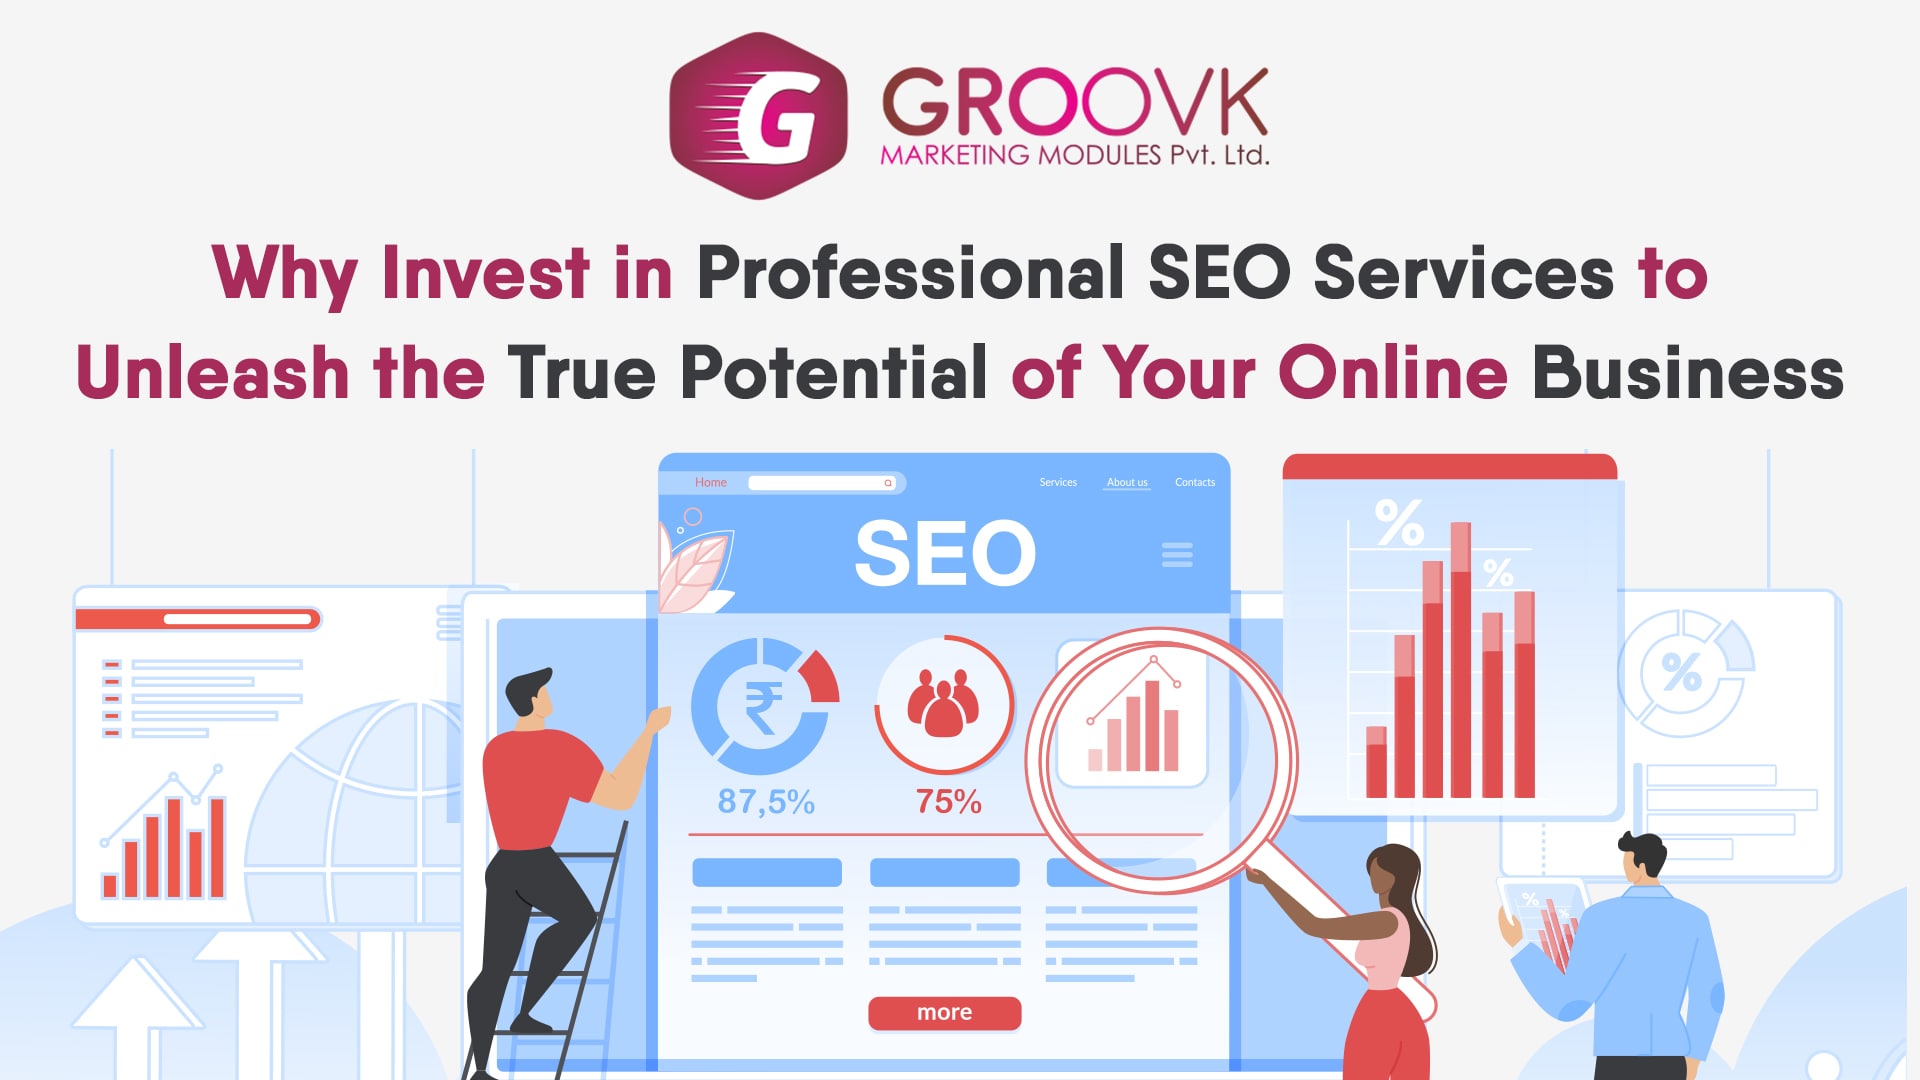 Why Invest in Professional SEO Services - Groovk Marketing 